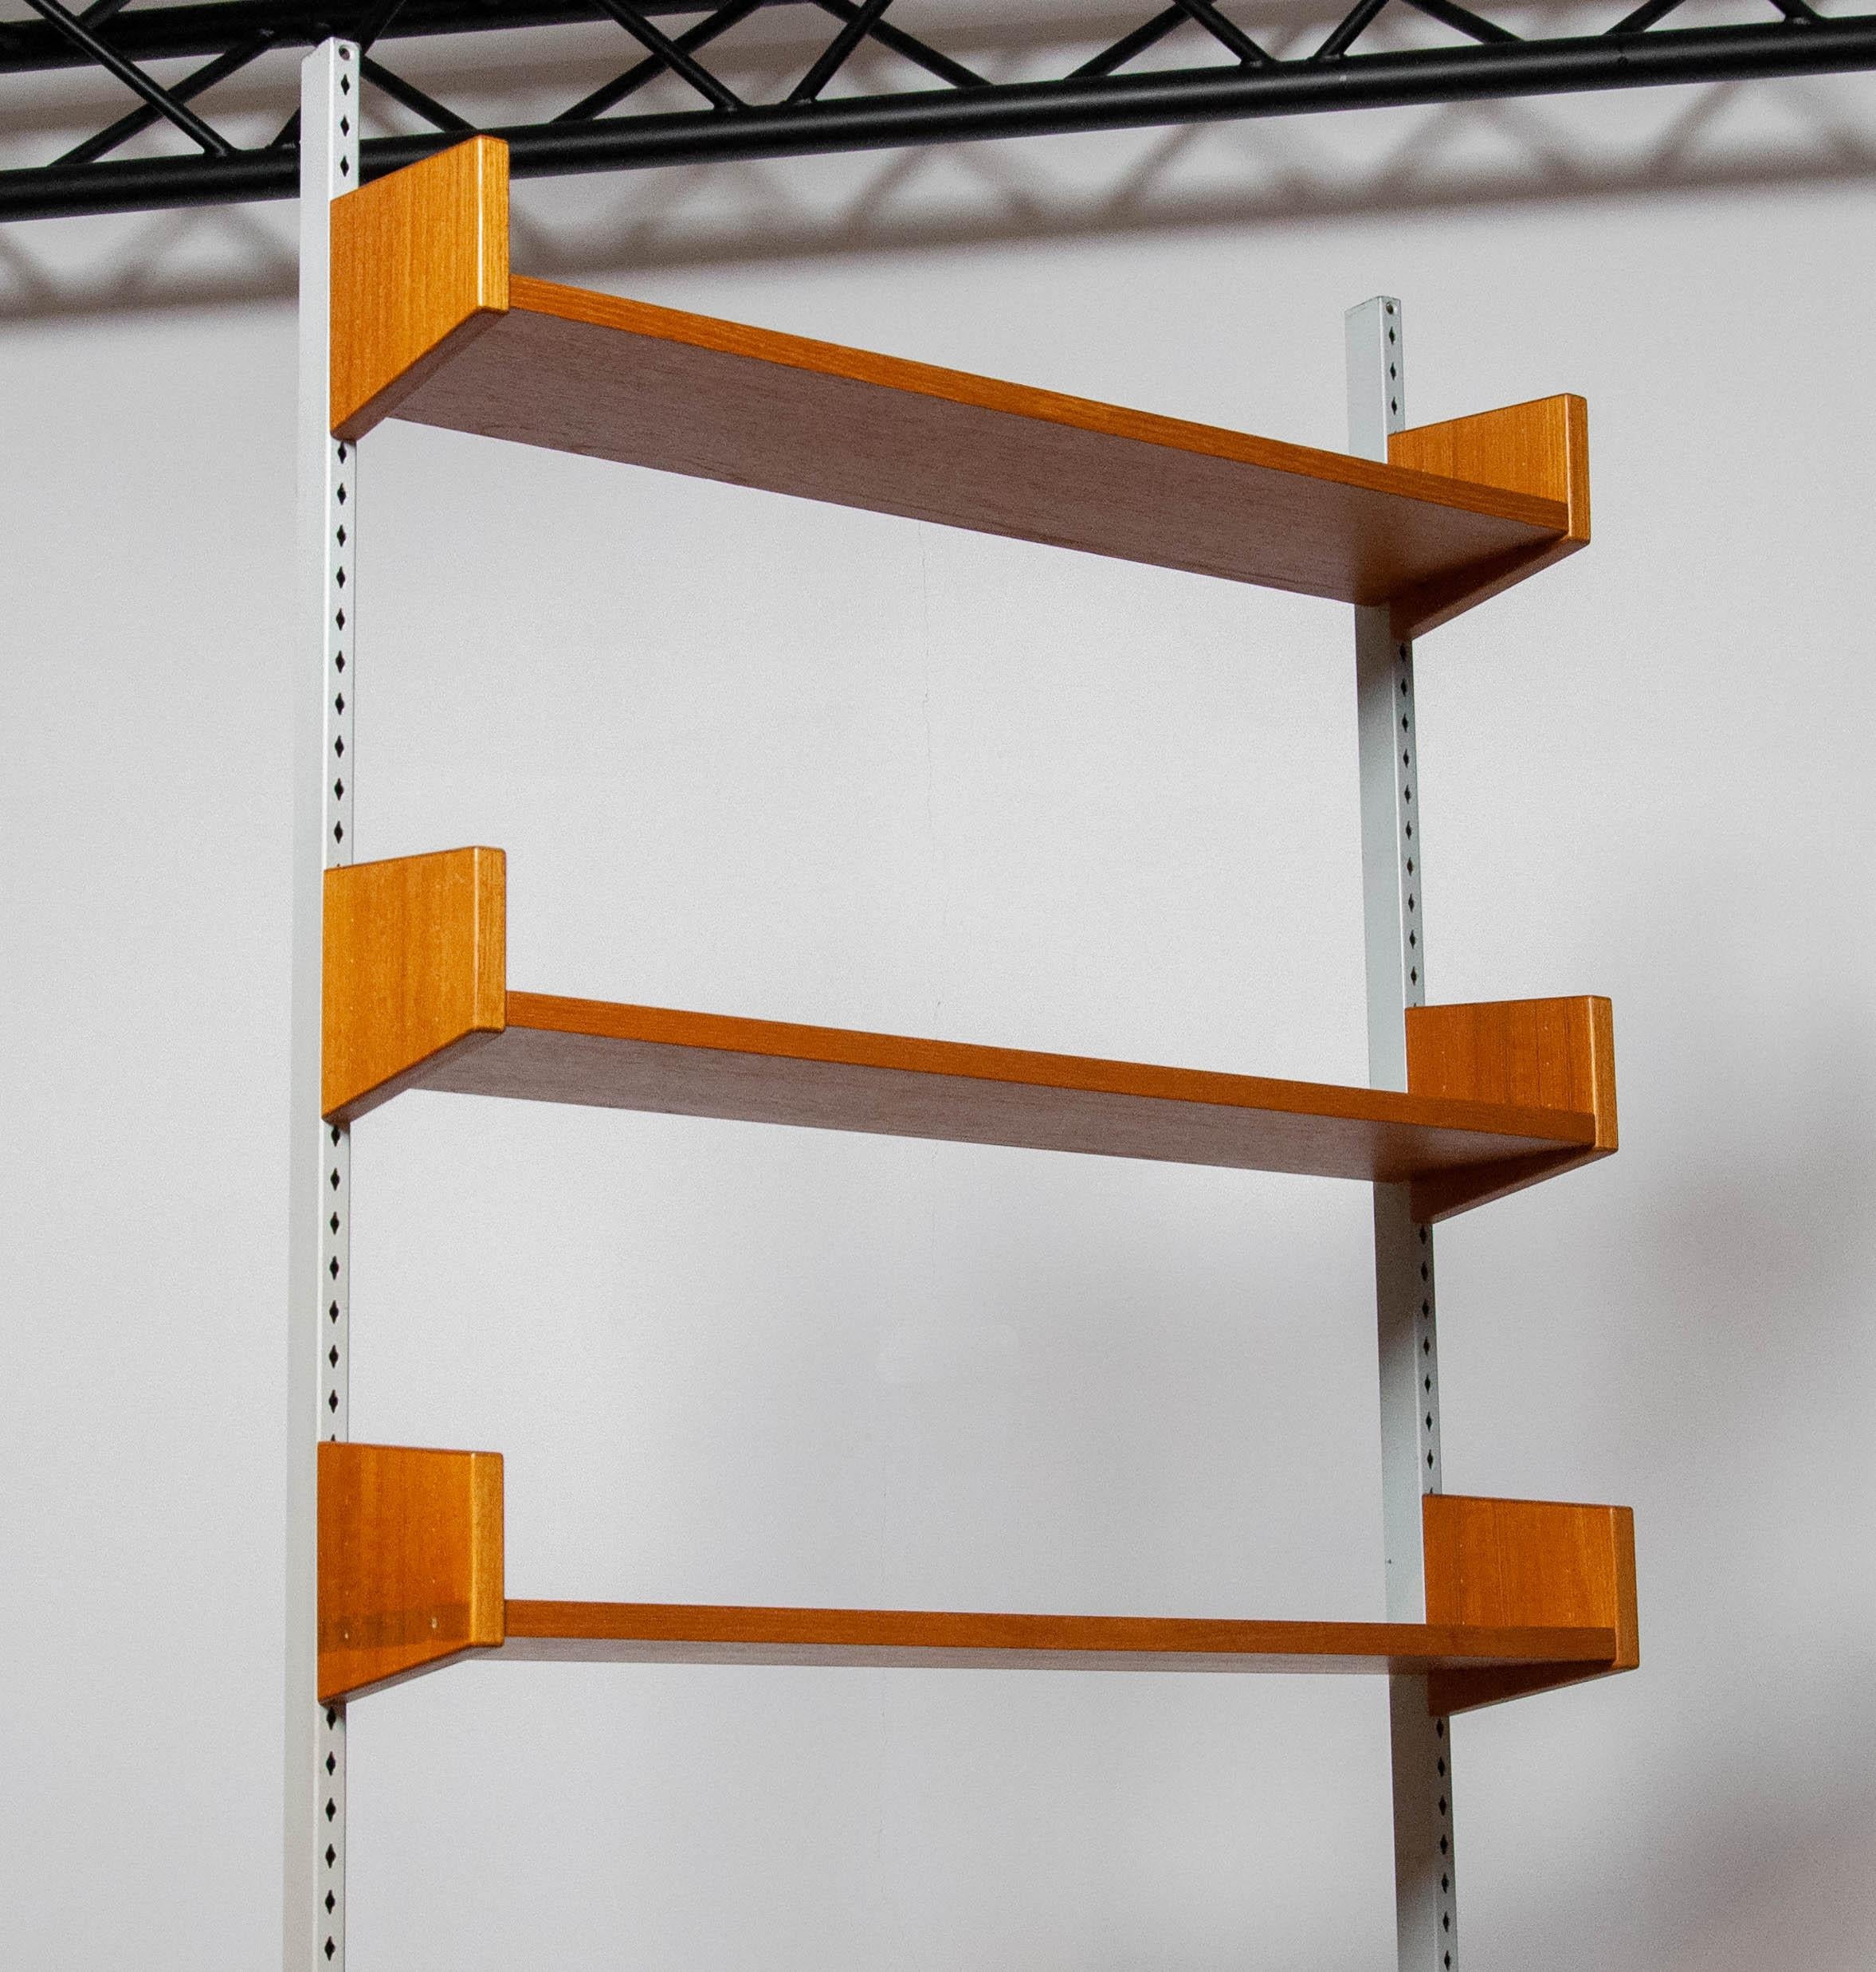 1950's Teak Shelf System / Bookcase in Teak with Steel Bars by Harald Lundqvist For Sale 1